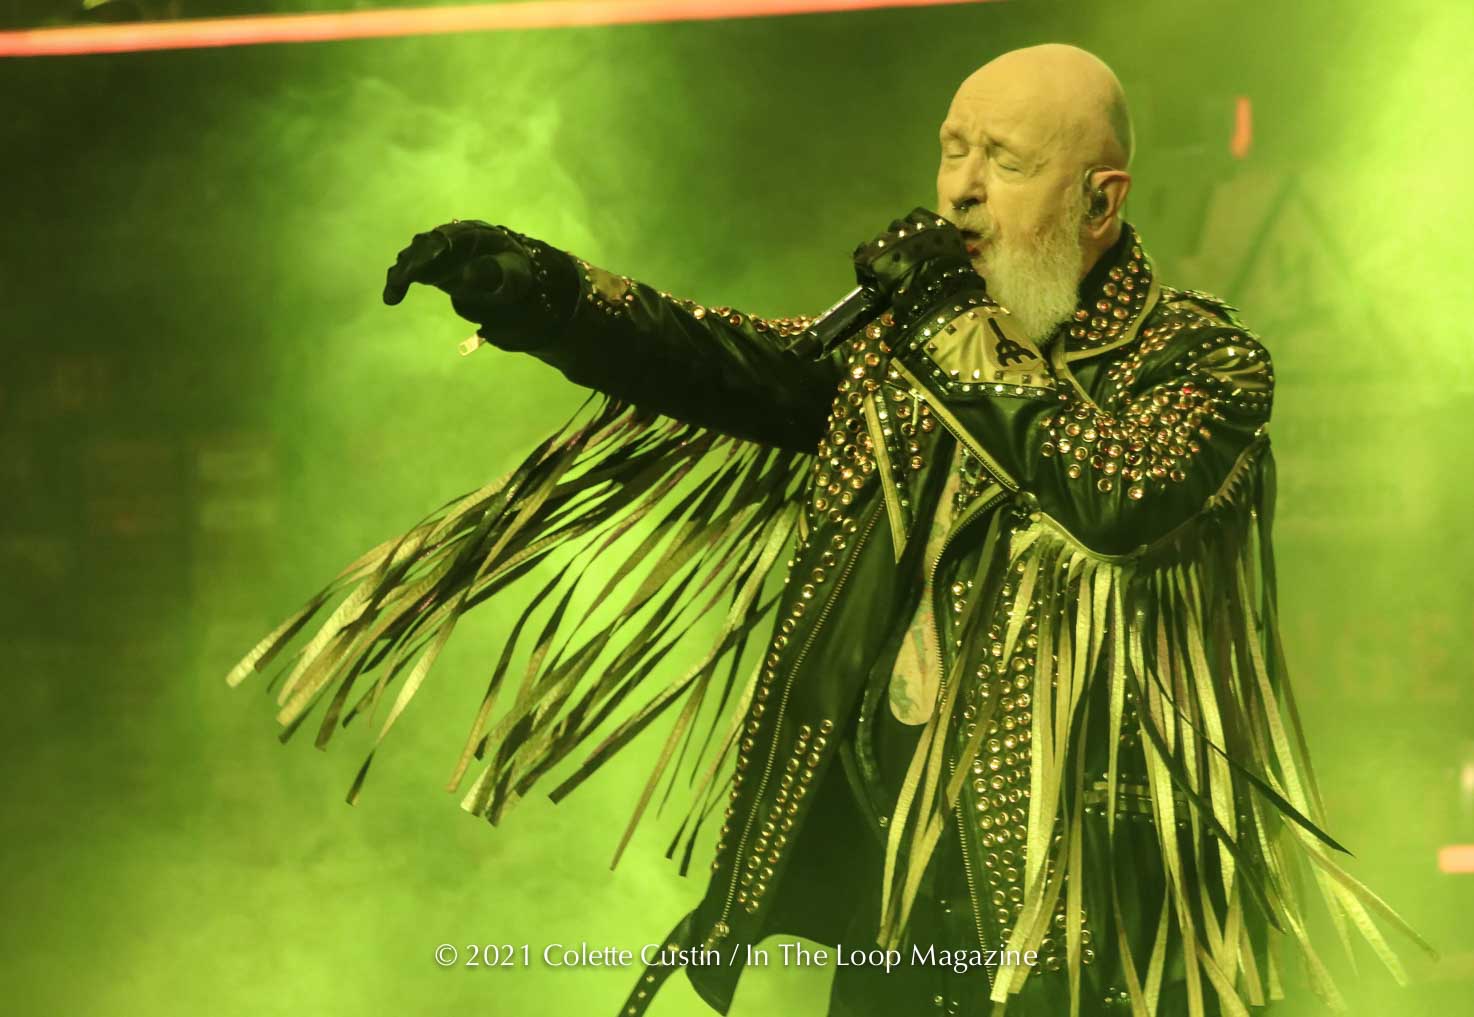 Judas Priest’s 50th Anniversary Tour Finally Arrives In Chicago And They’re Still Raising The Bar For Metal